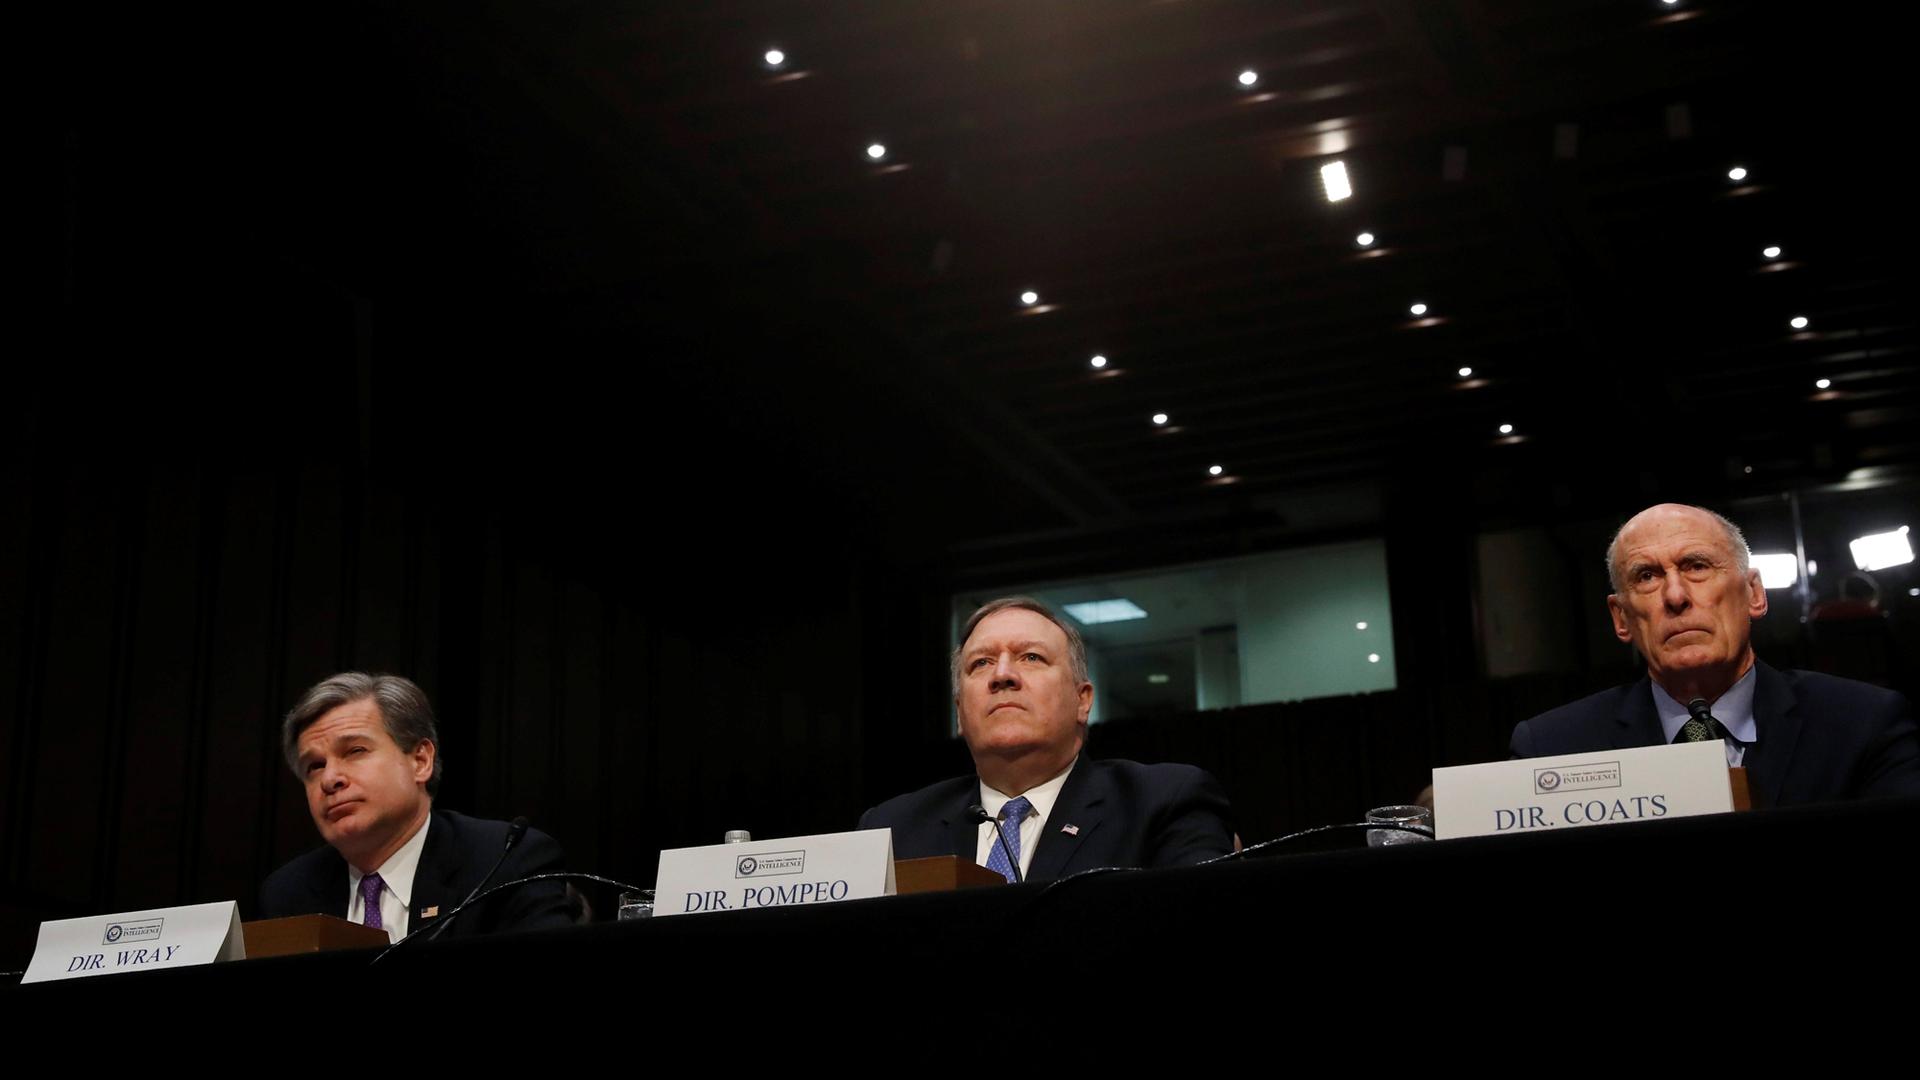 FBI Director Christopher Wray, CIA Director Mike Pompeo and Director of National Intelligence Dan Coats testify before a Senate Intelligence Committee hearing on "World Wide Threats" in Washington, Feb. 13, 2018.